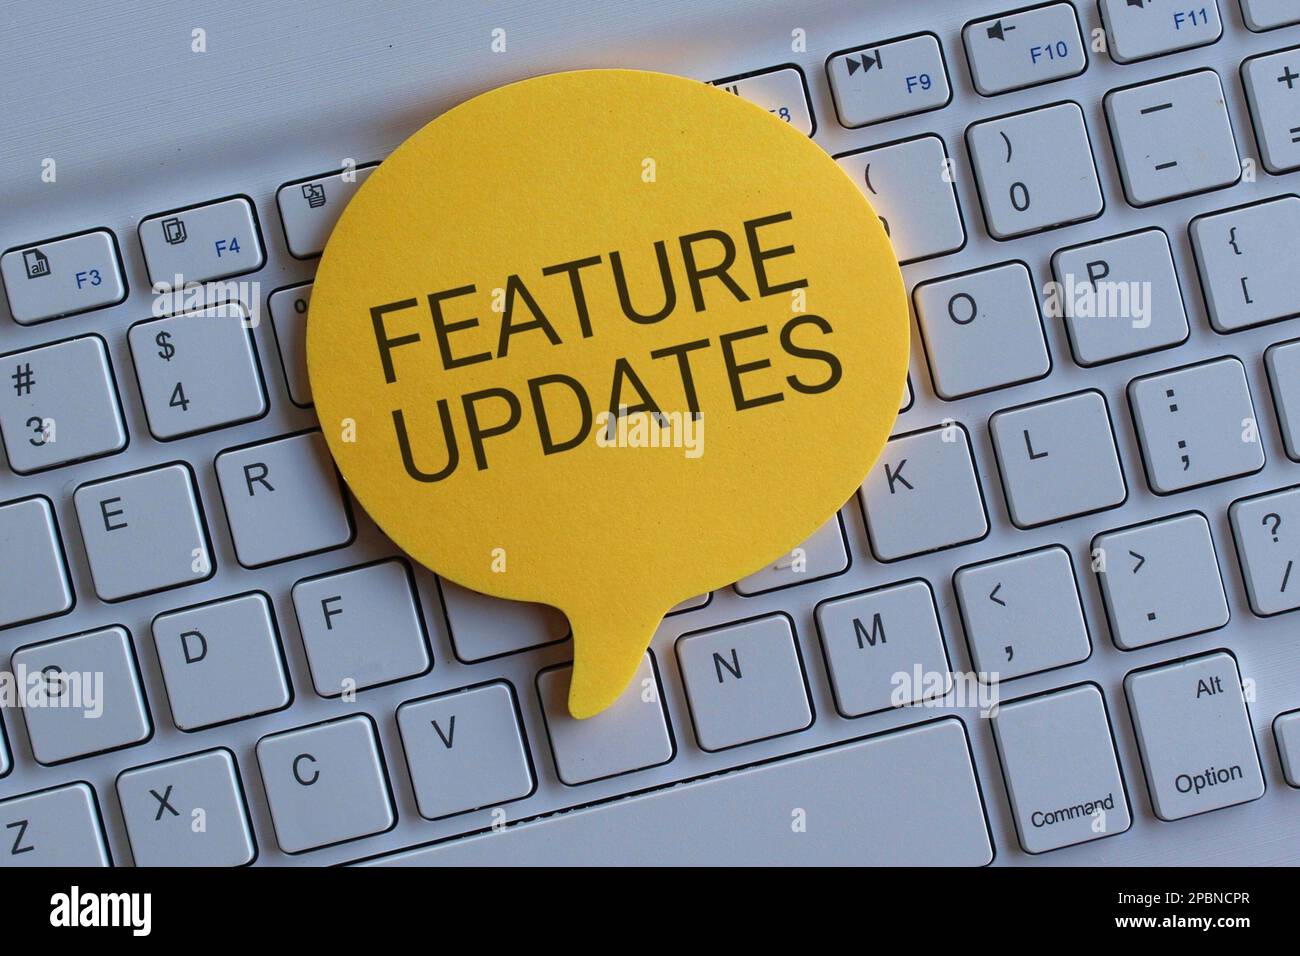 Top view image of keyboard and speech bubble with text FEATURE UPDATES. Technology concept Stock Photo